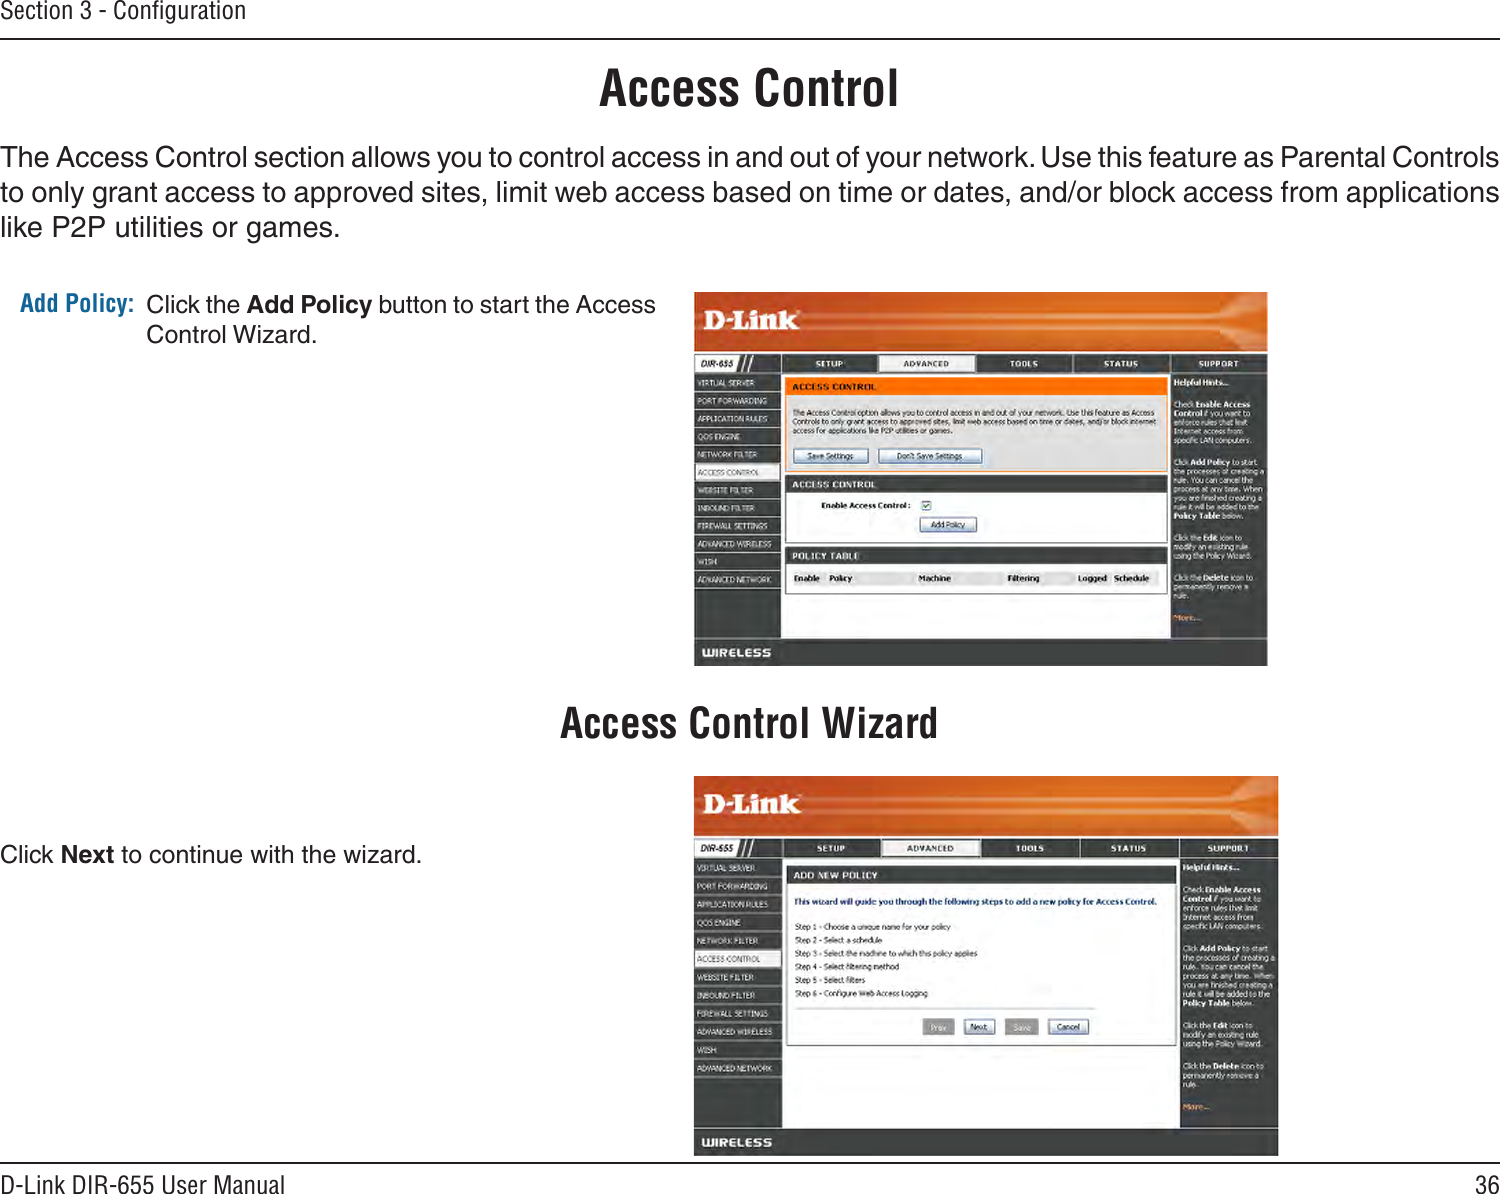 36D-Link DIR-655 User ManualSection 3 - ConﬁgurationAccess ControlClick the Add Policy button to start the Access Control Wizard. Add Policy:The Access Control section allows you to control access in and out of your network. Use this feature as Parental Controls to only grant access to approved sites, limit web access based on time or dates, and/or block access from applications like P2P utilities or games.Click Next to continue with the wizard.Access Control Wizard